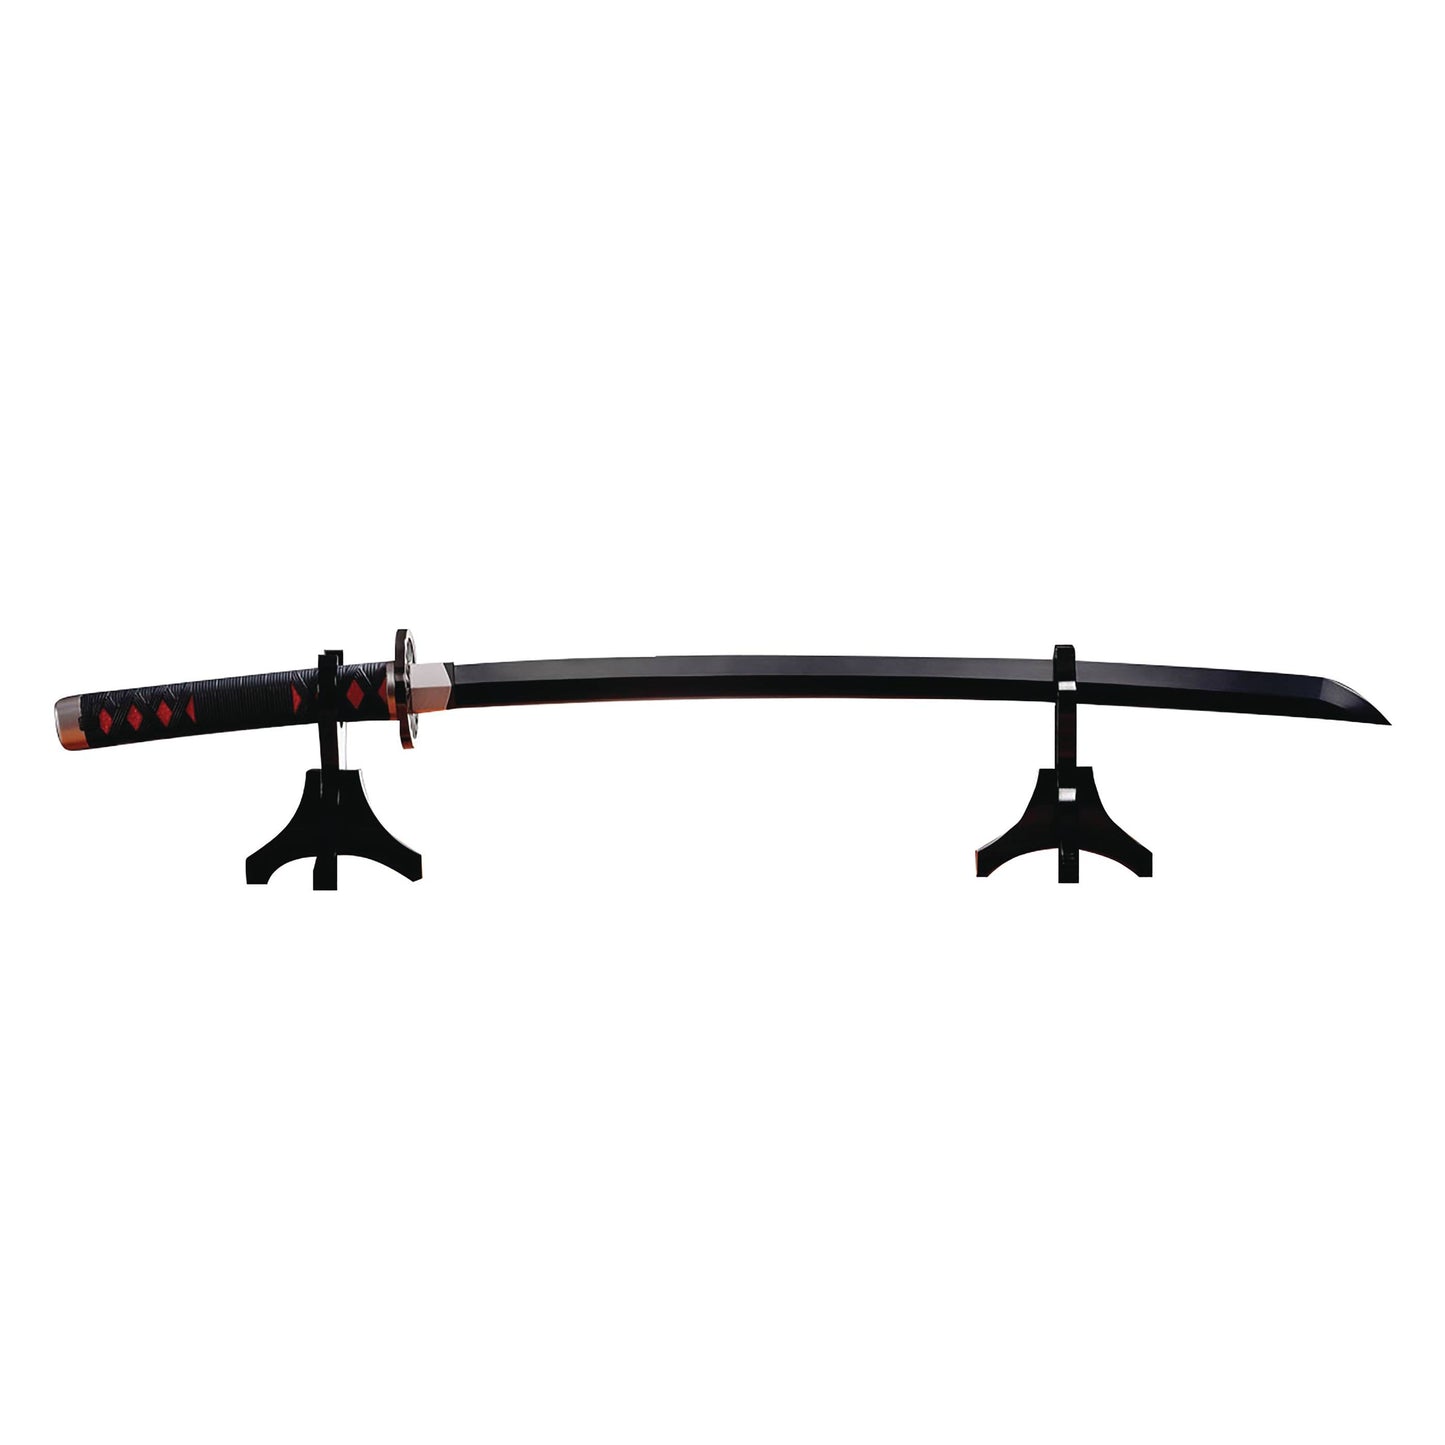 A life-sized Proplica replica of Tanjiro Kamado's Nichirin Sword from Demon Slayer: Kimetsu no Yaiba. The sword is made from ABS and diecast, featuring fine details, and can playback over 50 sounds from the anime.